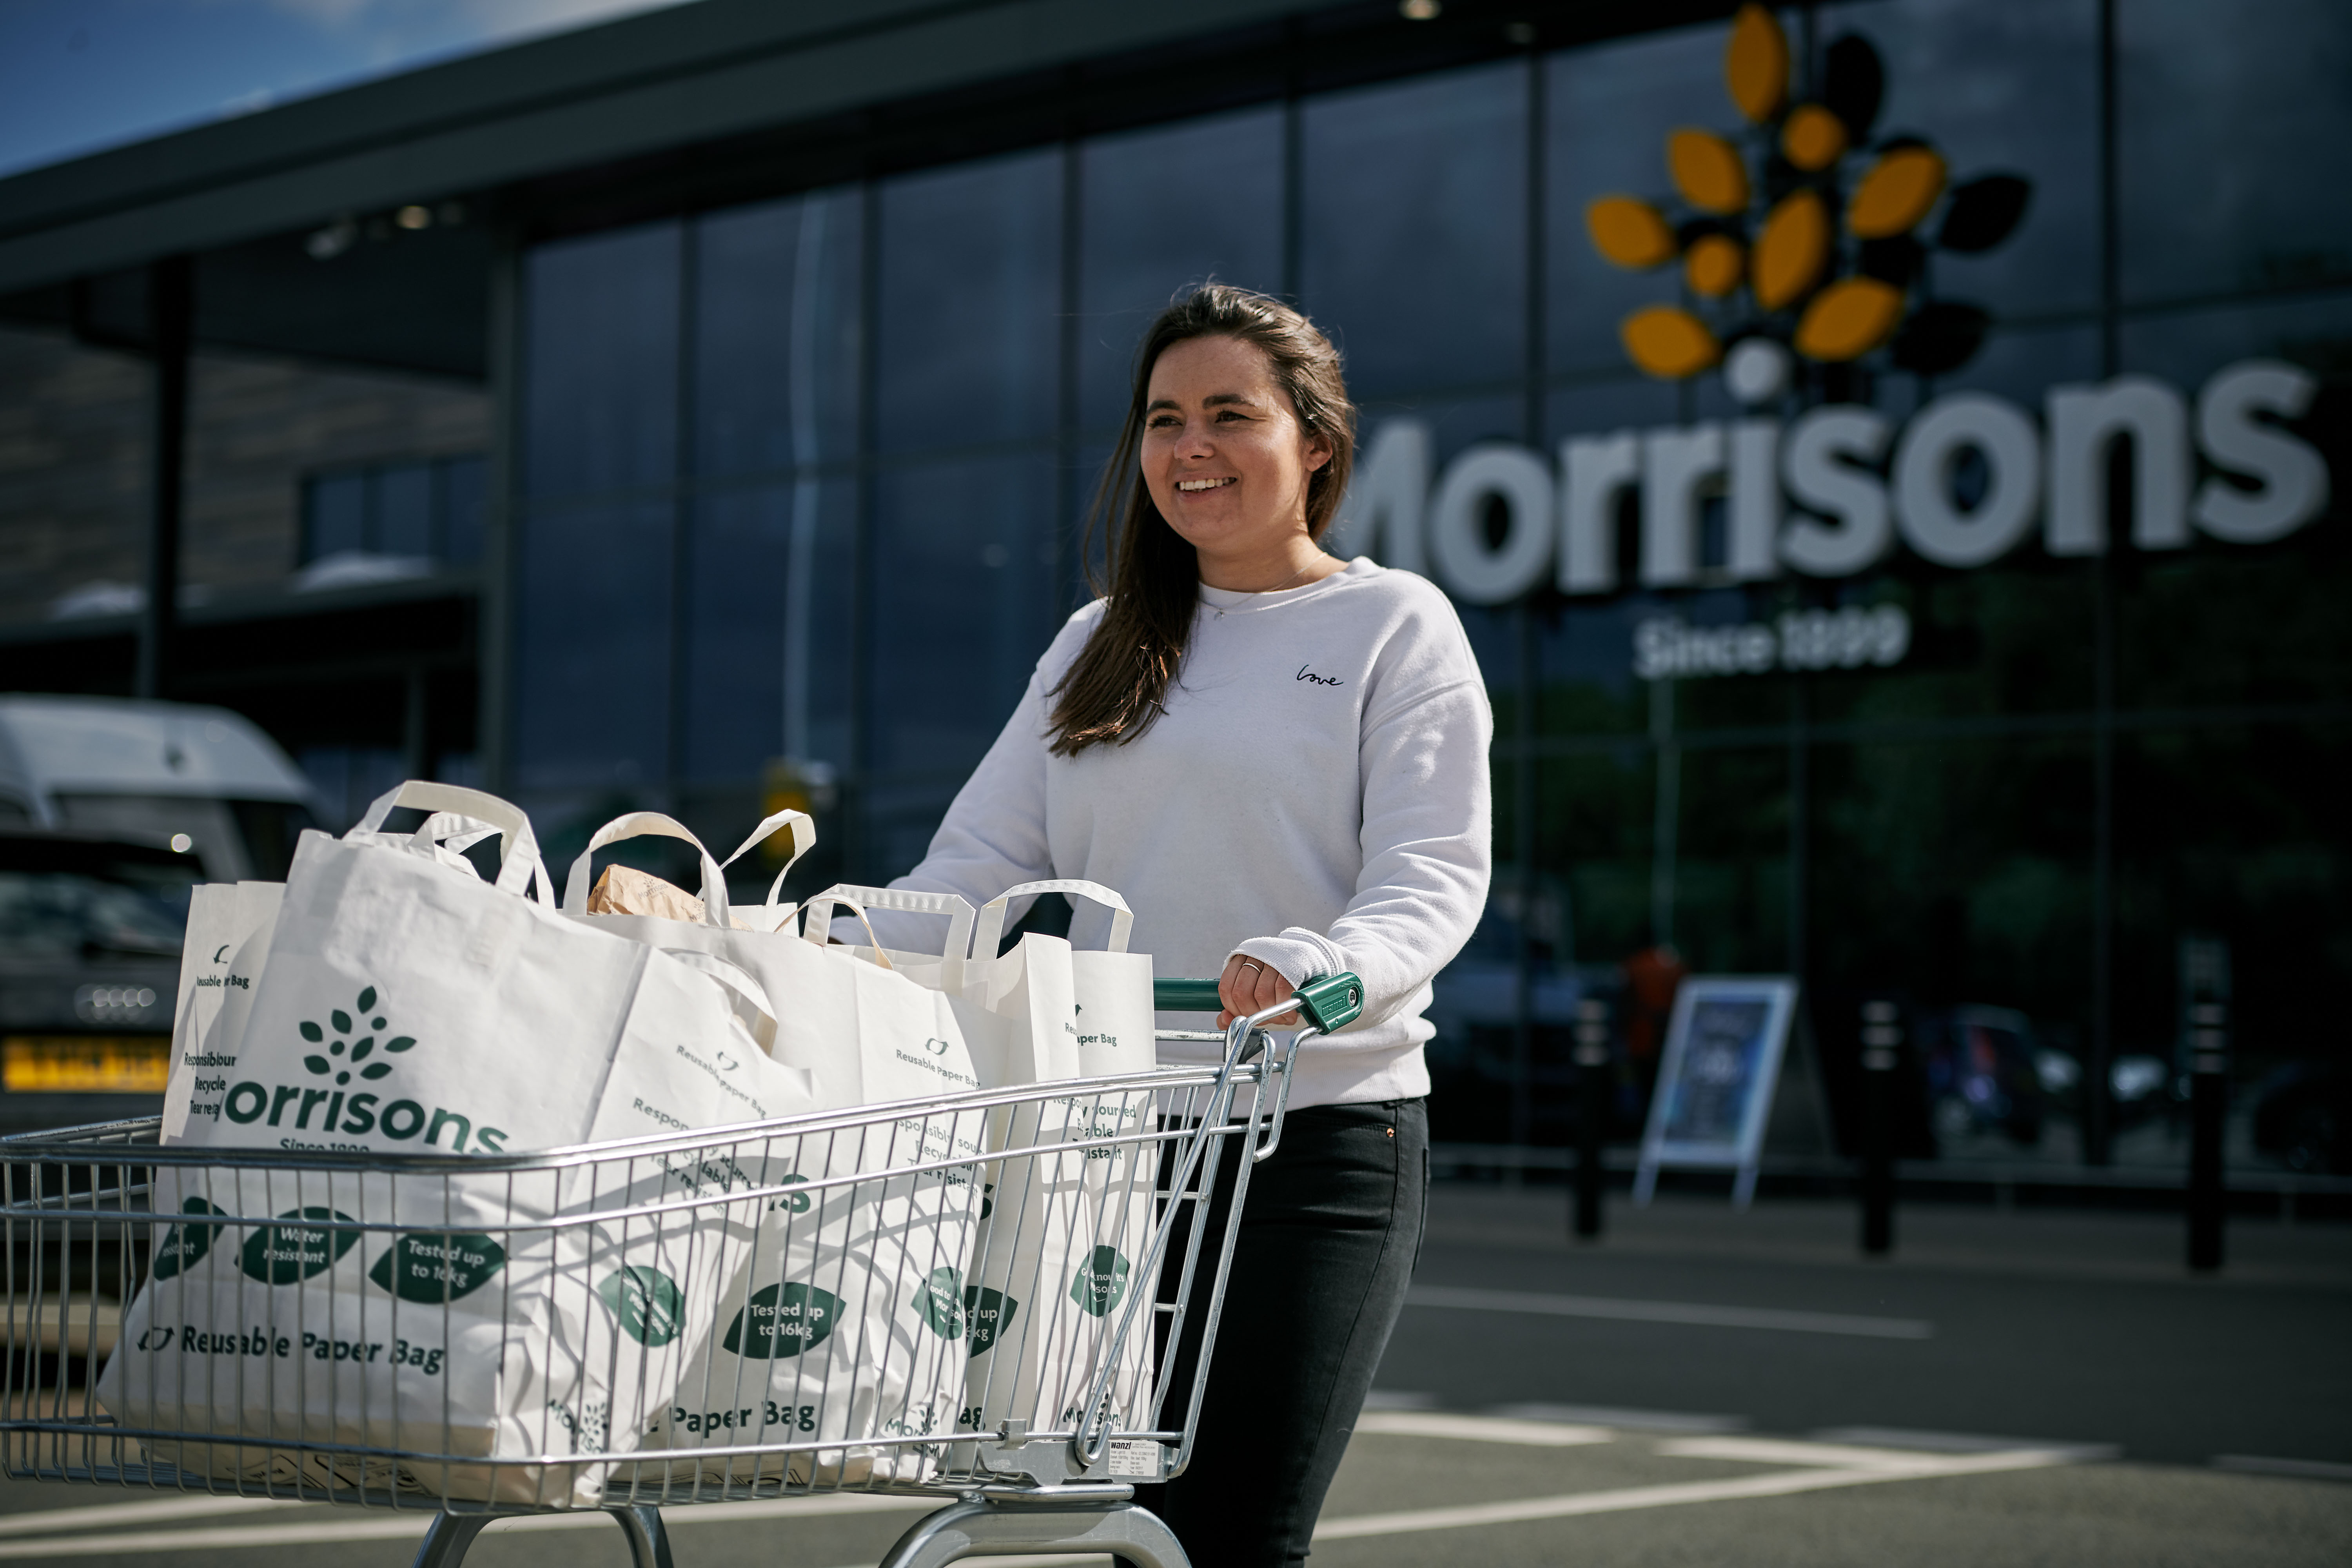 Morrisons becomes first supermarket to completely remove plastic carrier bags from stores